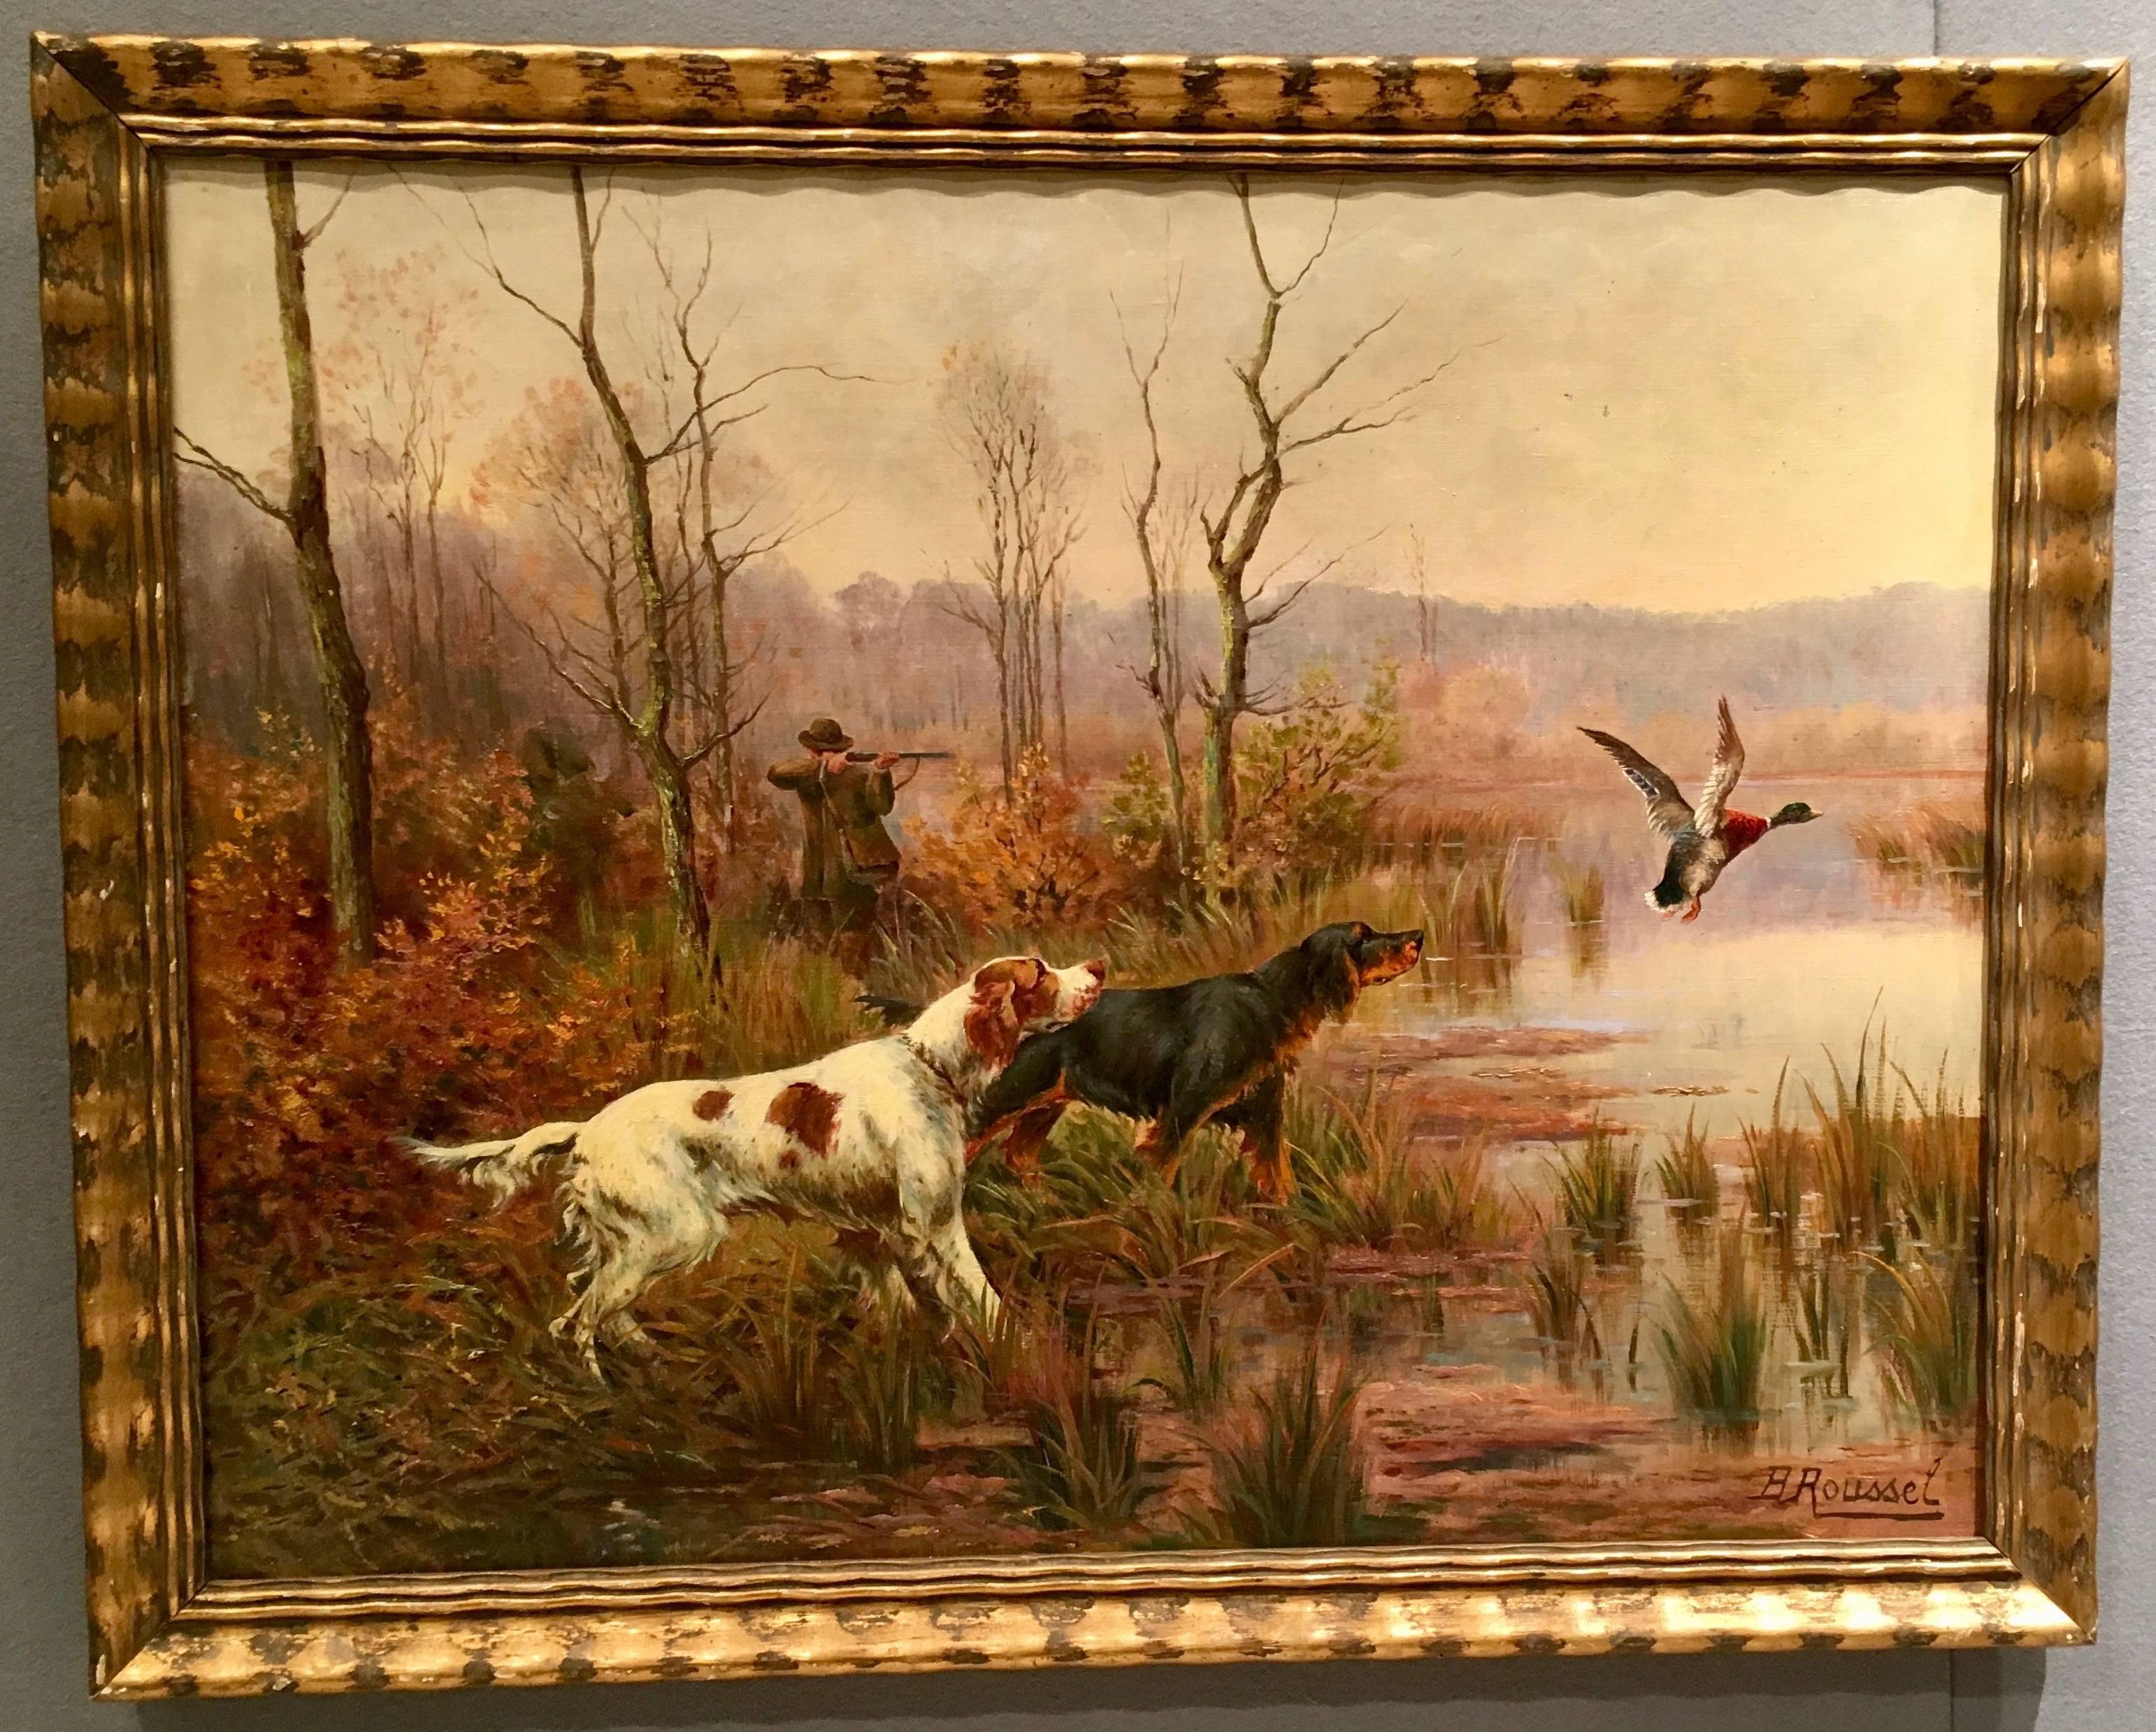 B. Roussel Animal Painting - French scene of Setters flushing a Duck with the Huntsman taking aim.